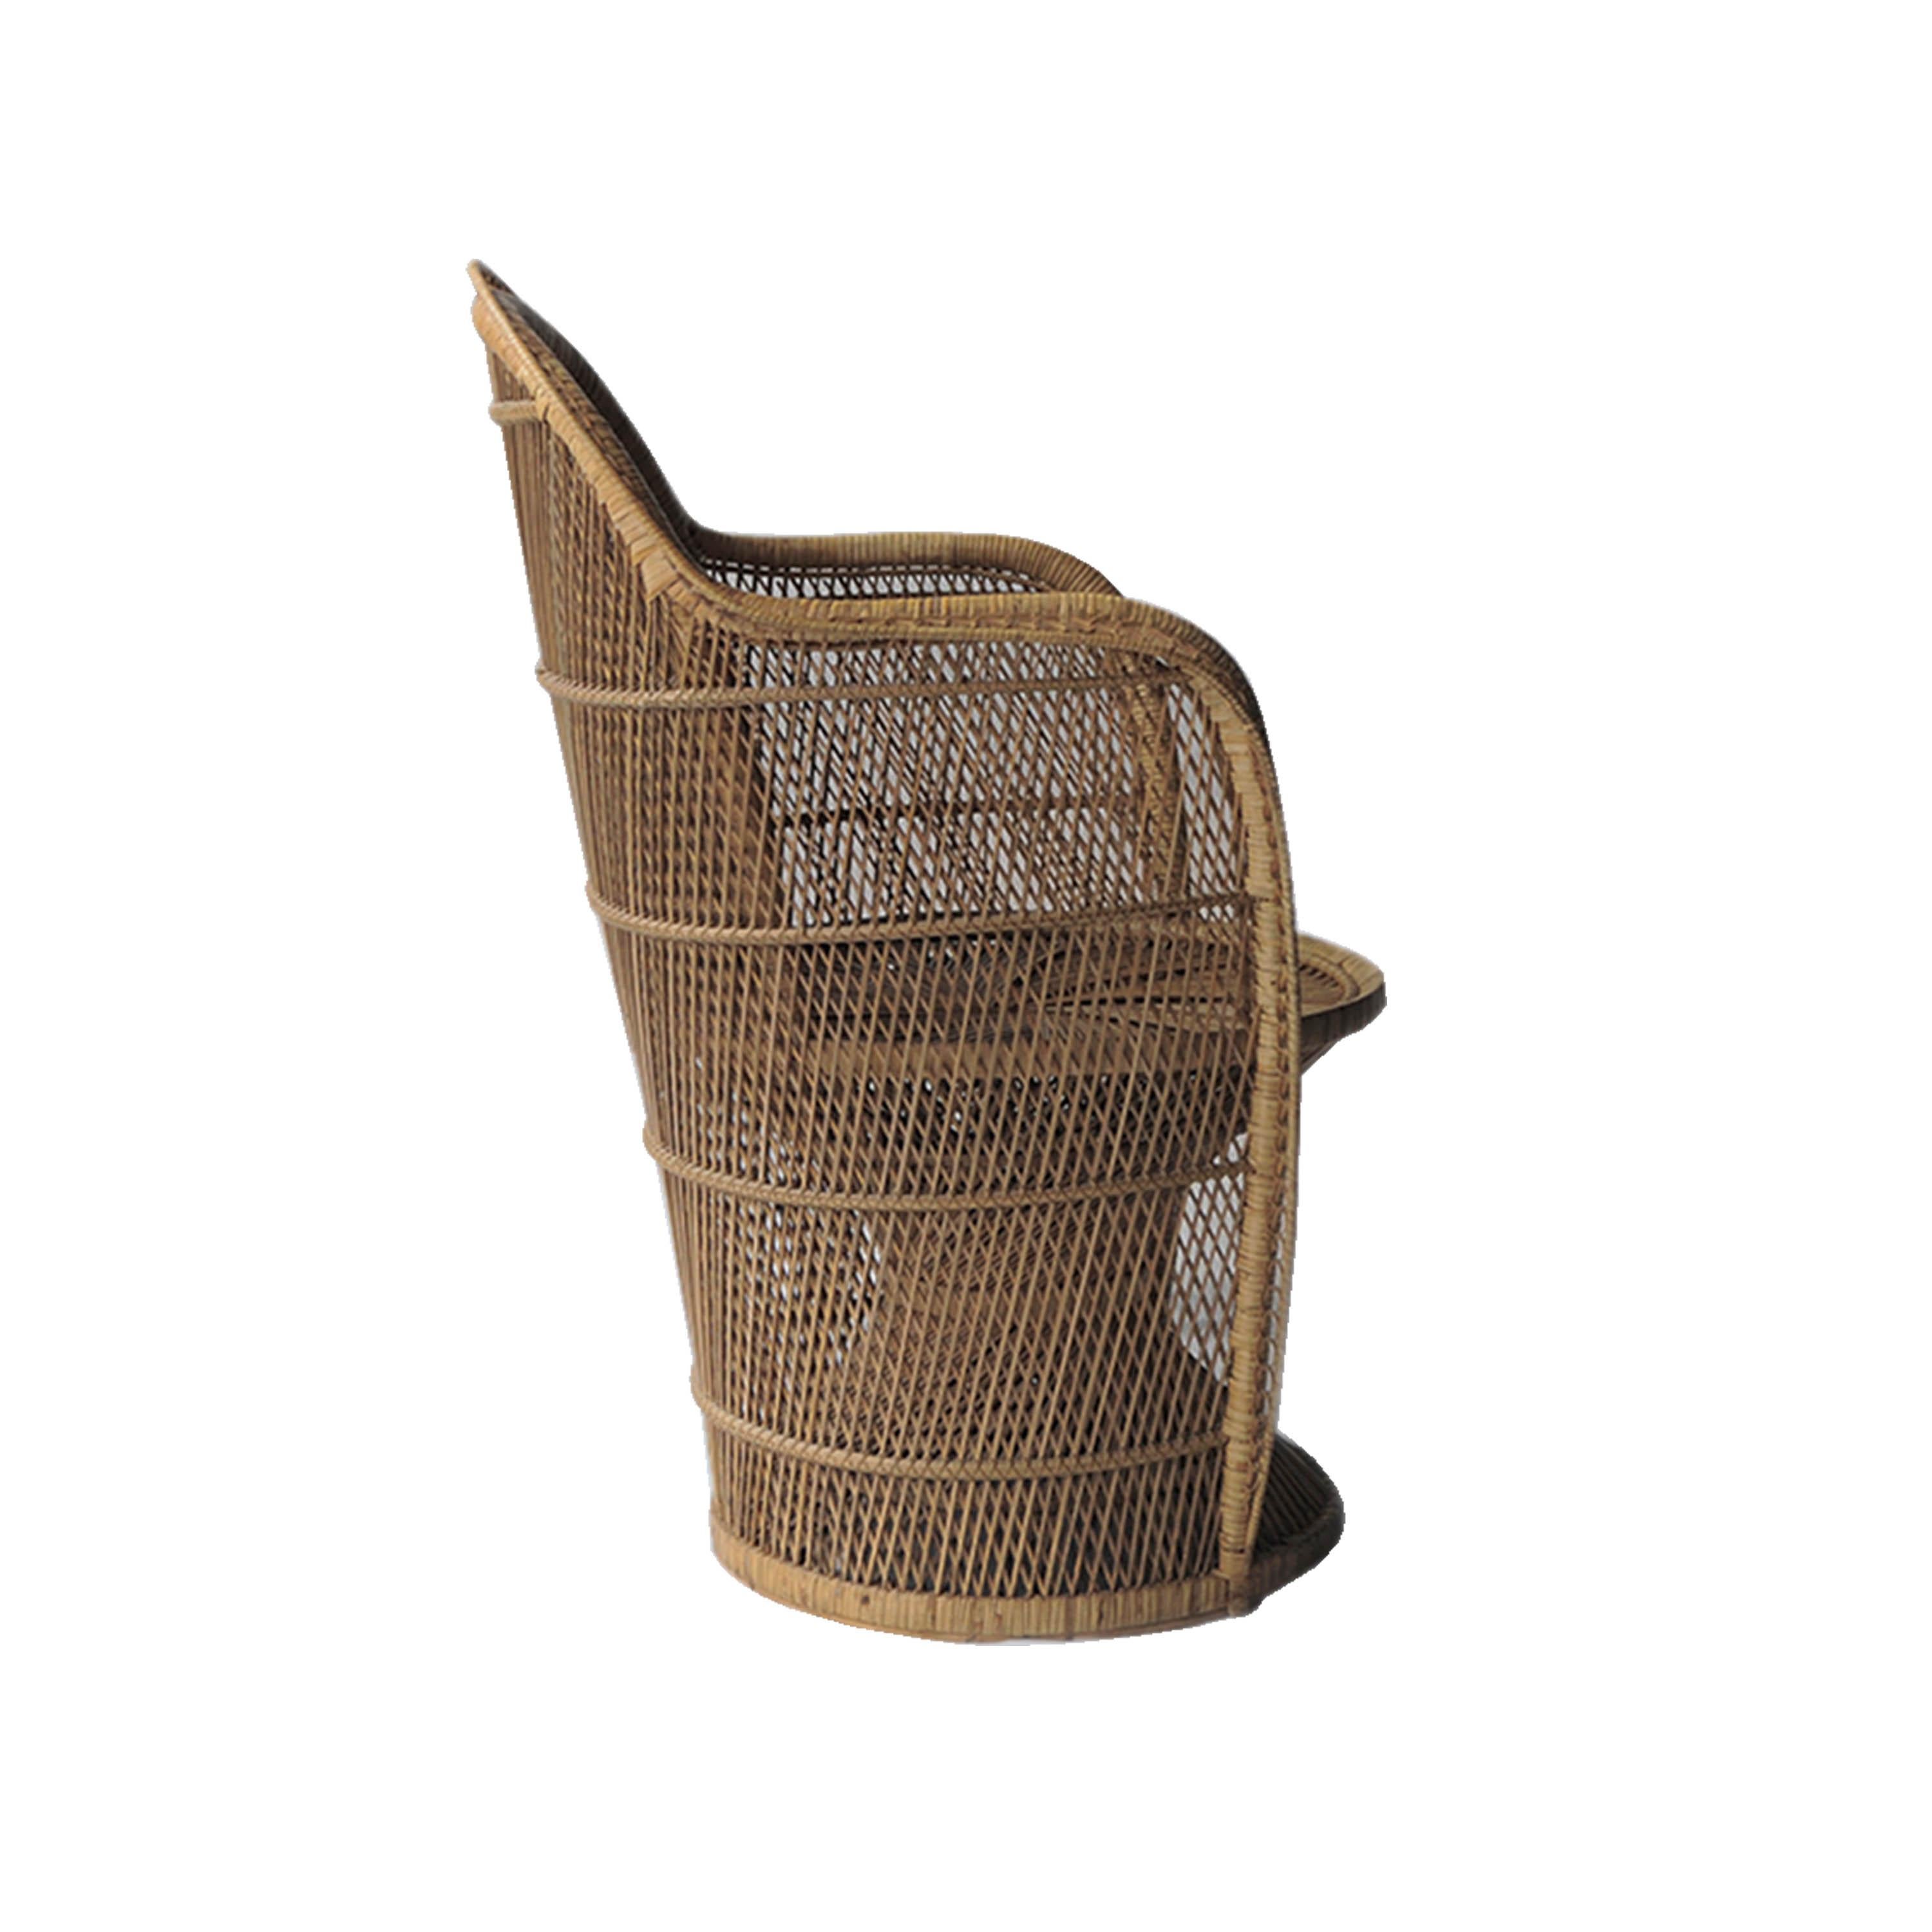 Armchair French of natural wicker made by hand.